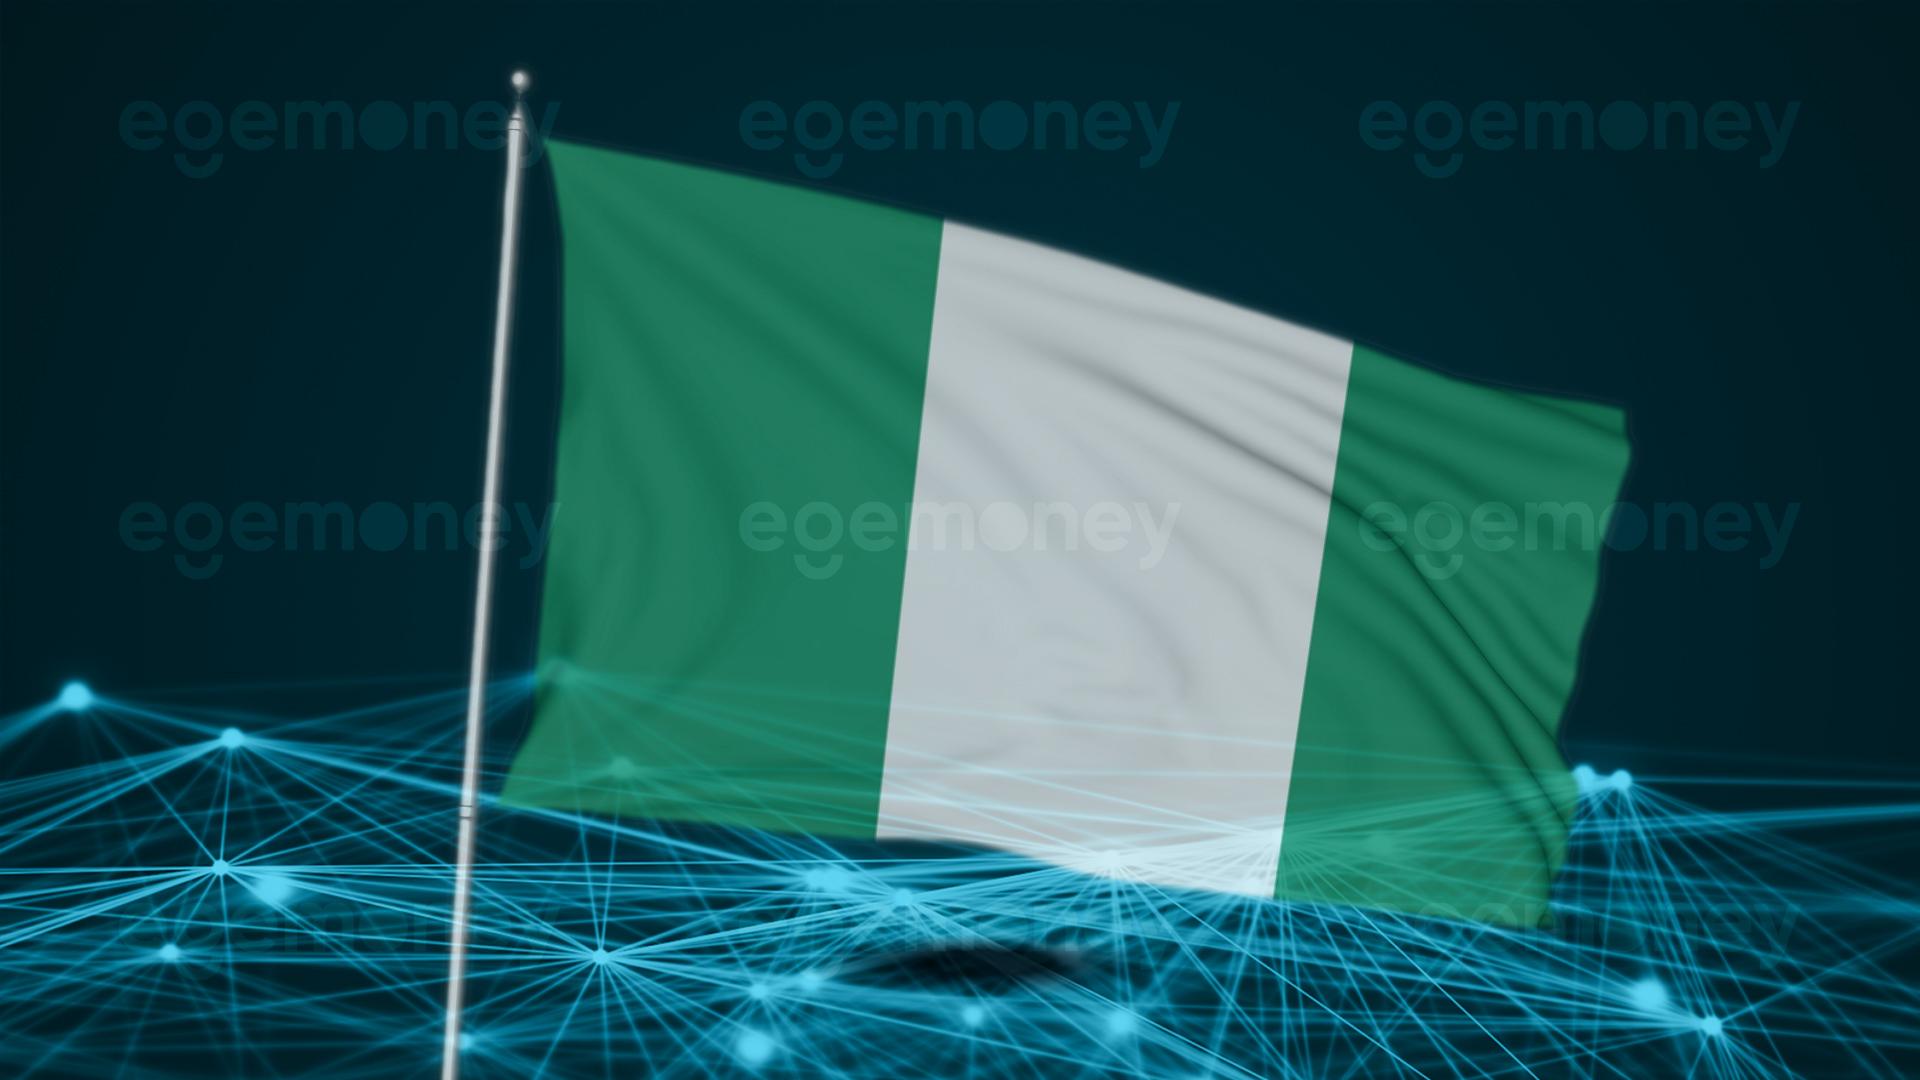 Nigeria National Agency Will Use Blockchain Technology to Verify State Certificates